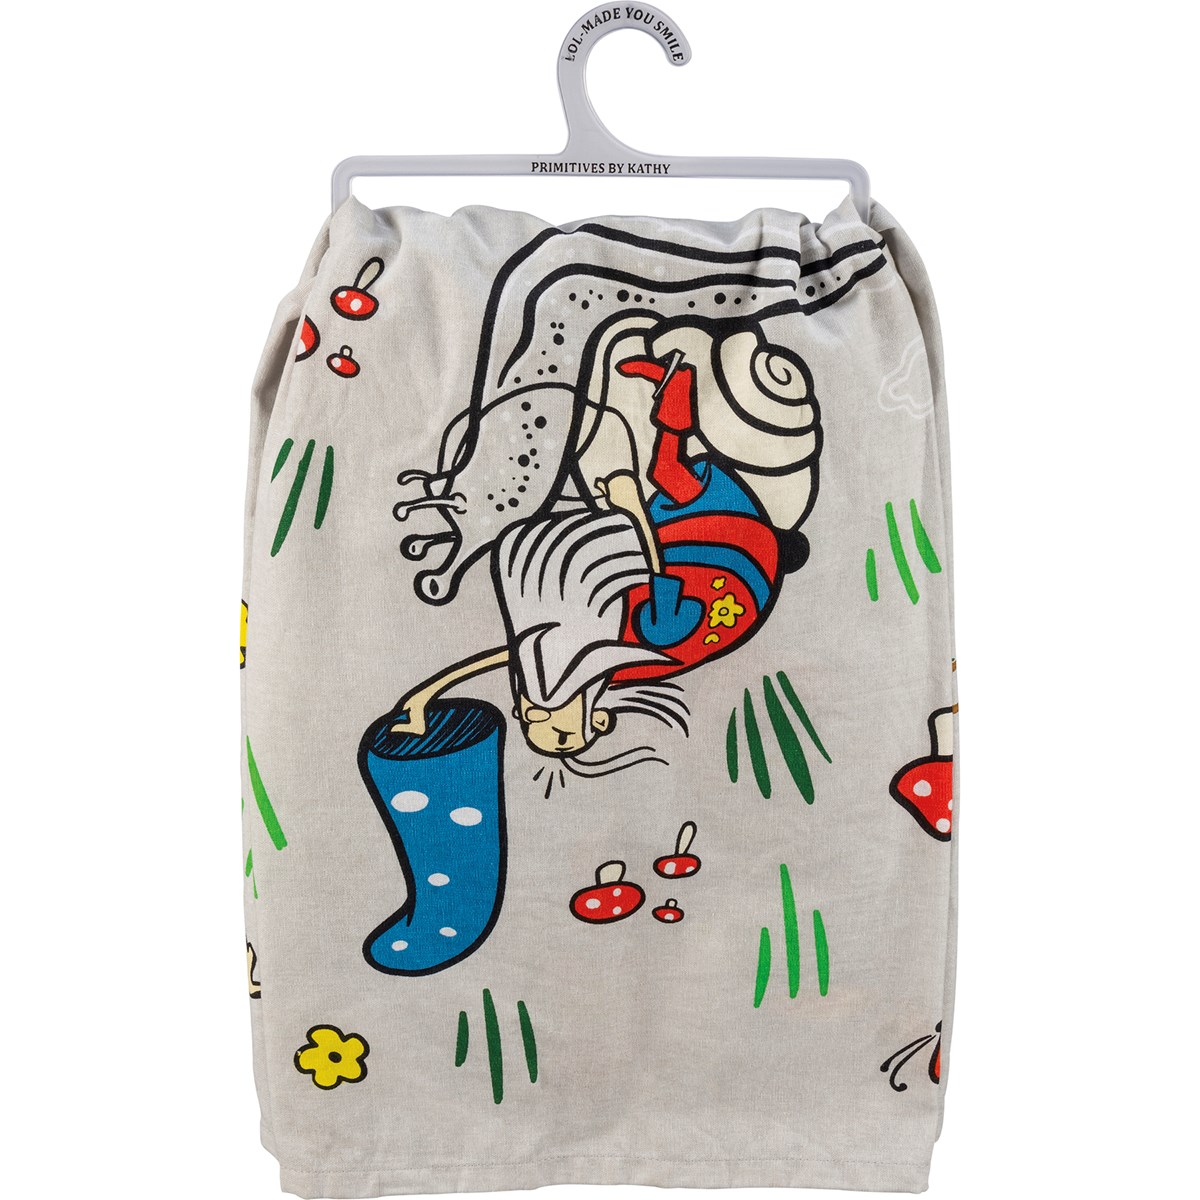 Kitchen Towel - House Is Not A Home Without Gnome - 28" x 28" - Cotton